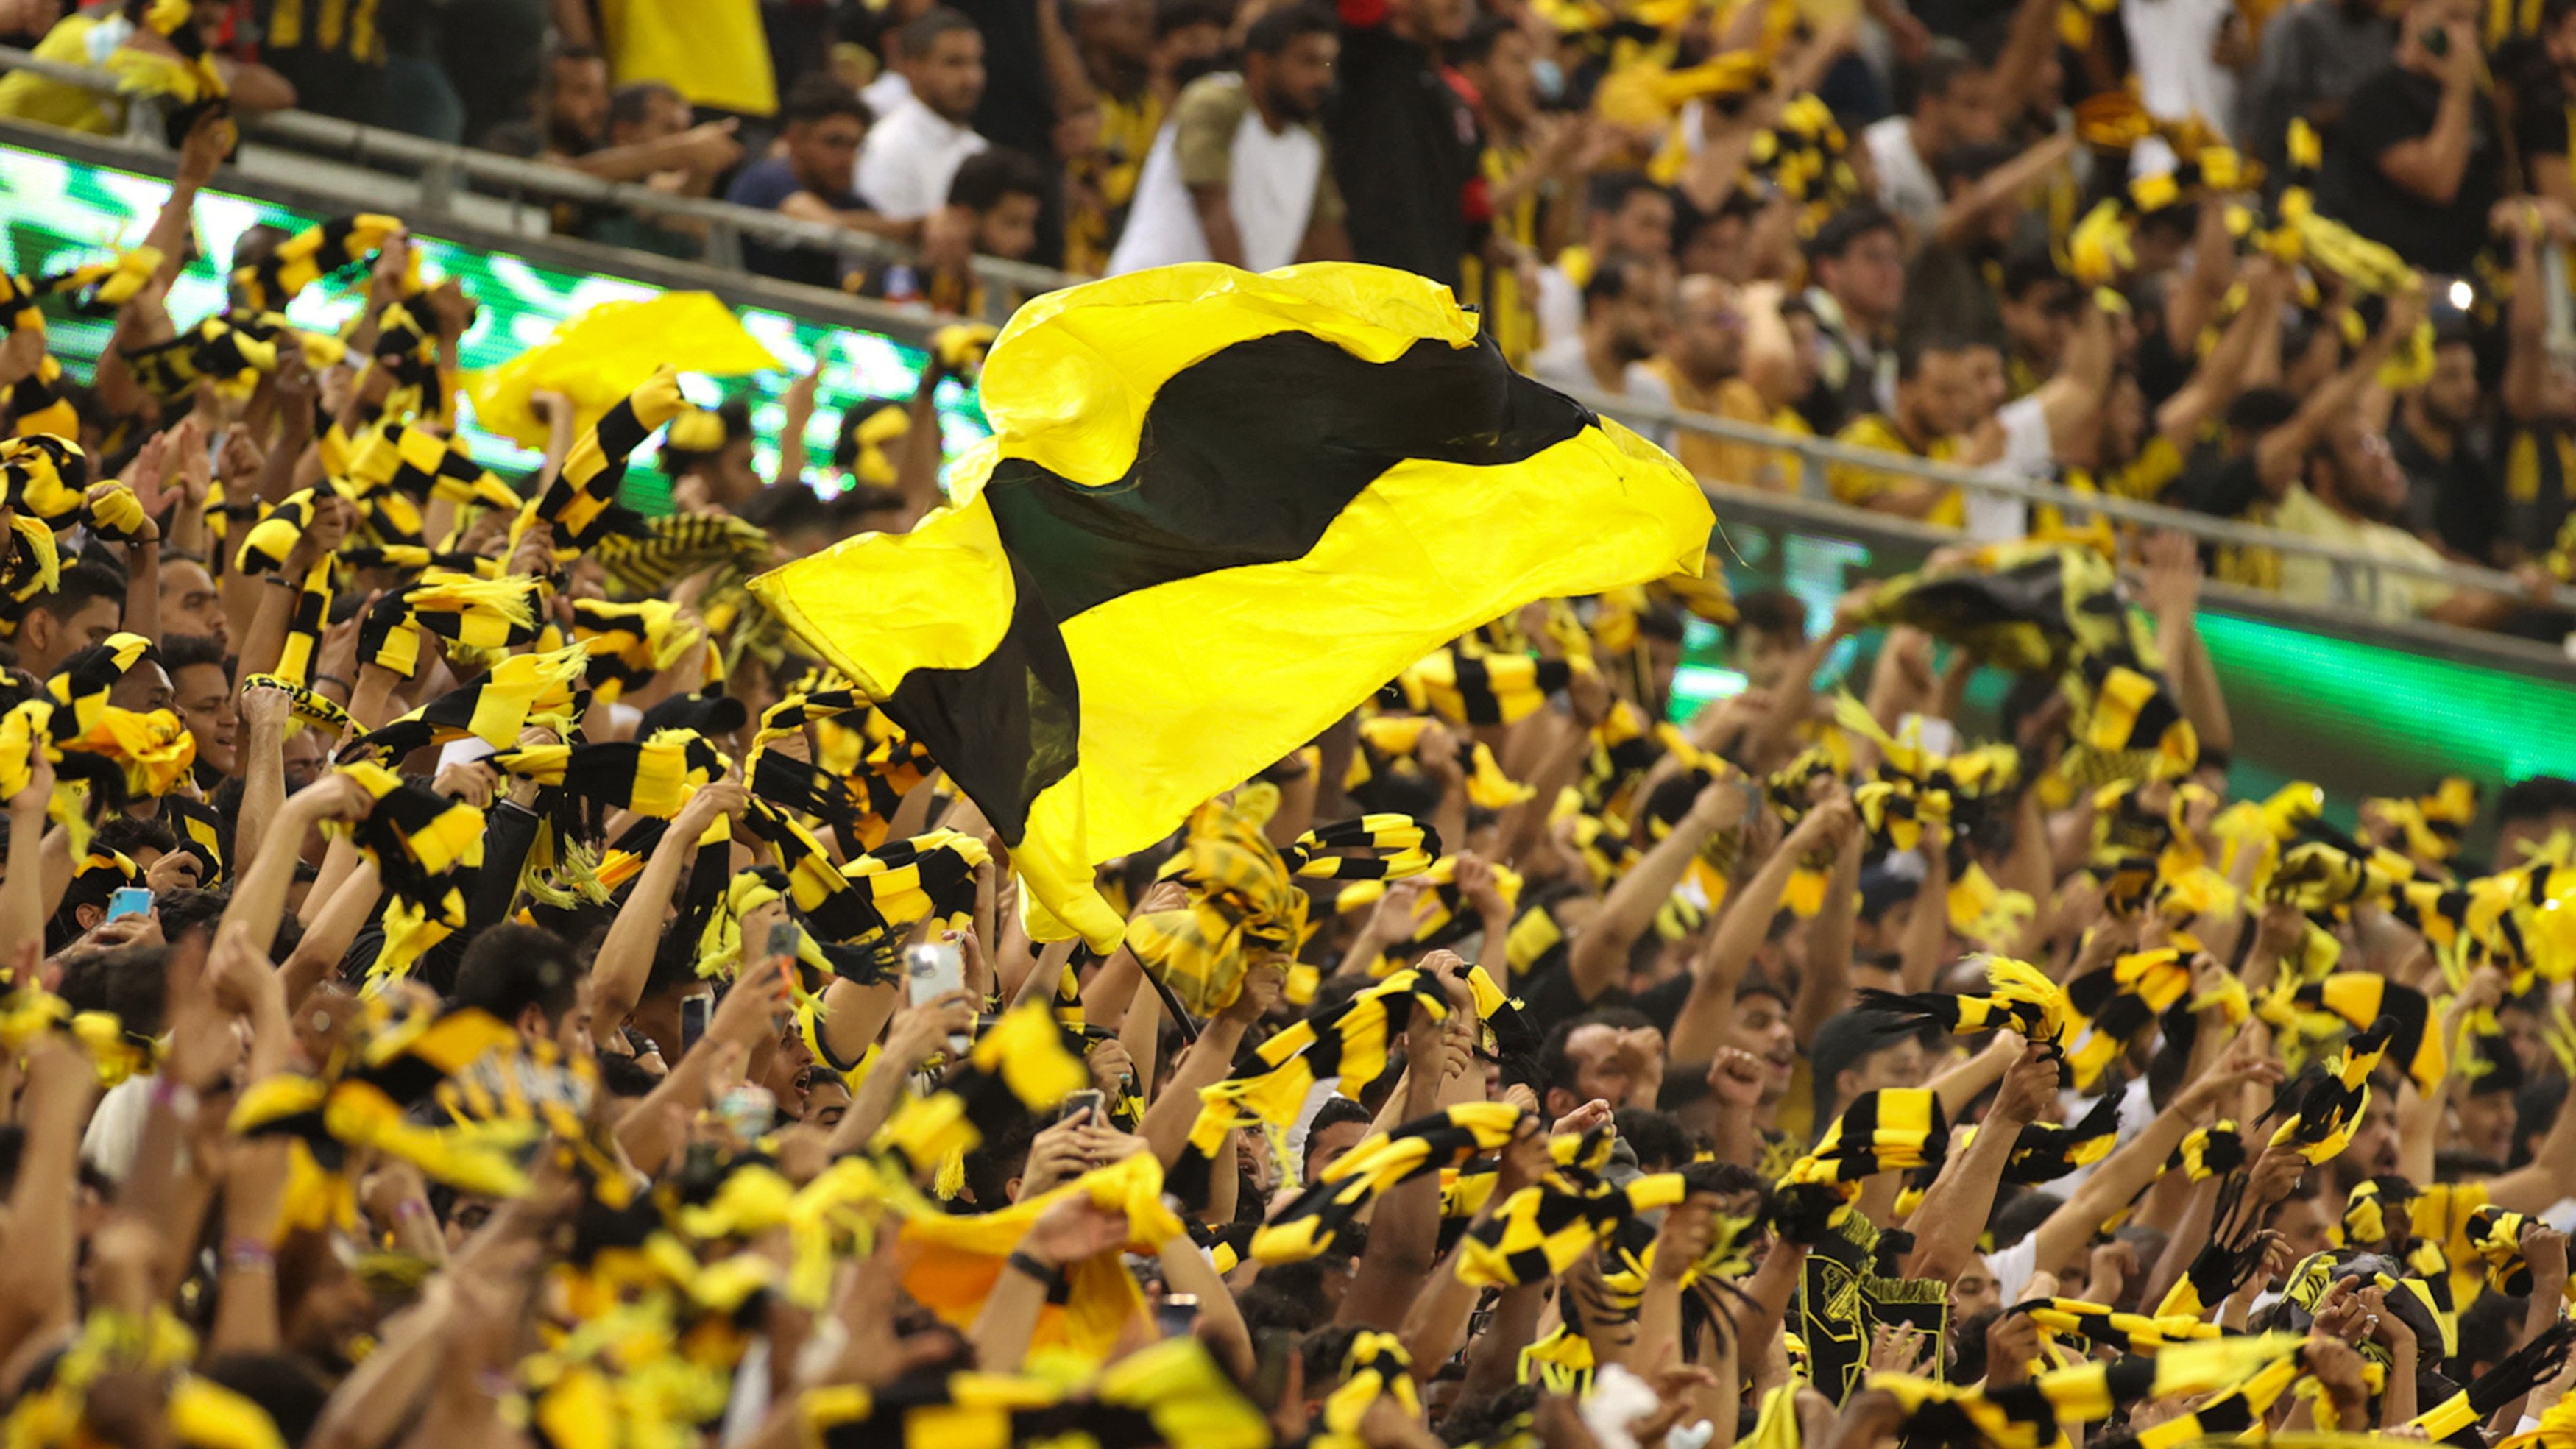 Supporters of joint league leaders al-Ittihad FC cheer during the Saudi Pro League football match against al-Hilal at the King Abdullah Sports City in Jeddah on 23 May 2022 (AFP)